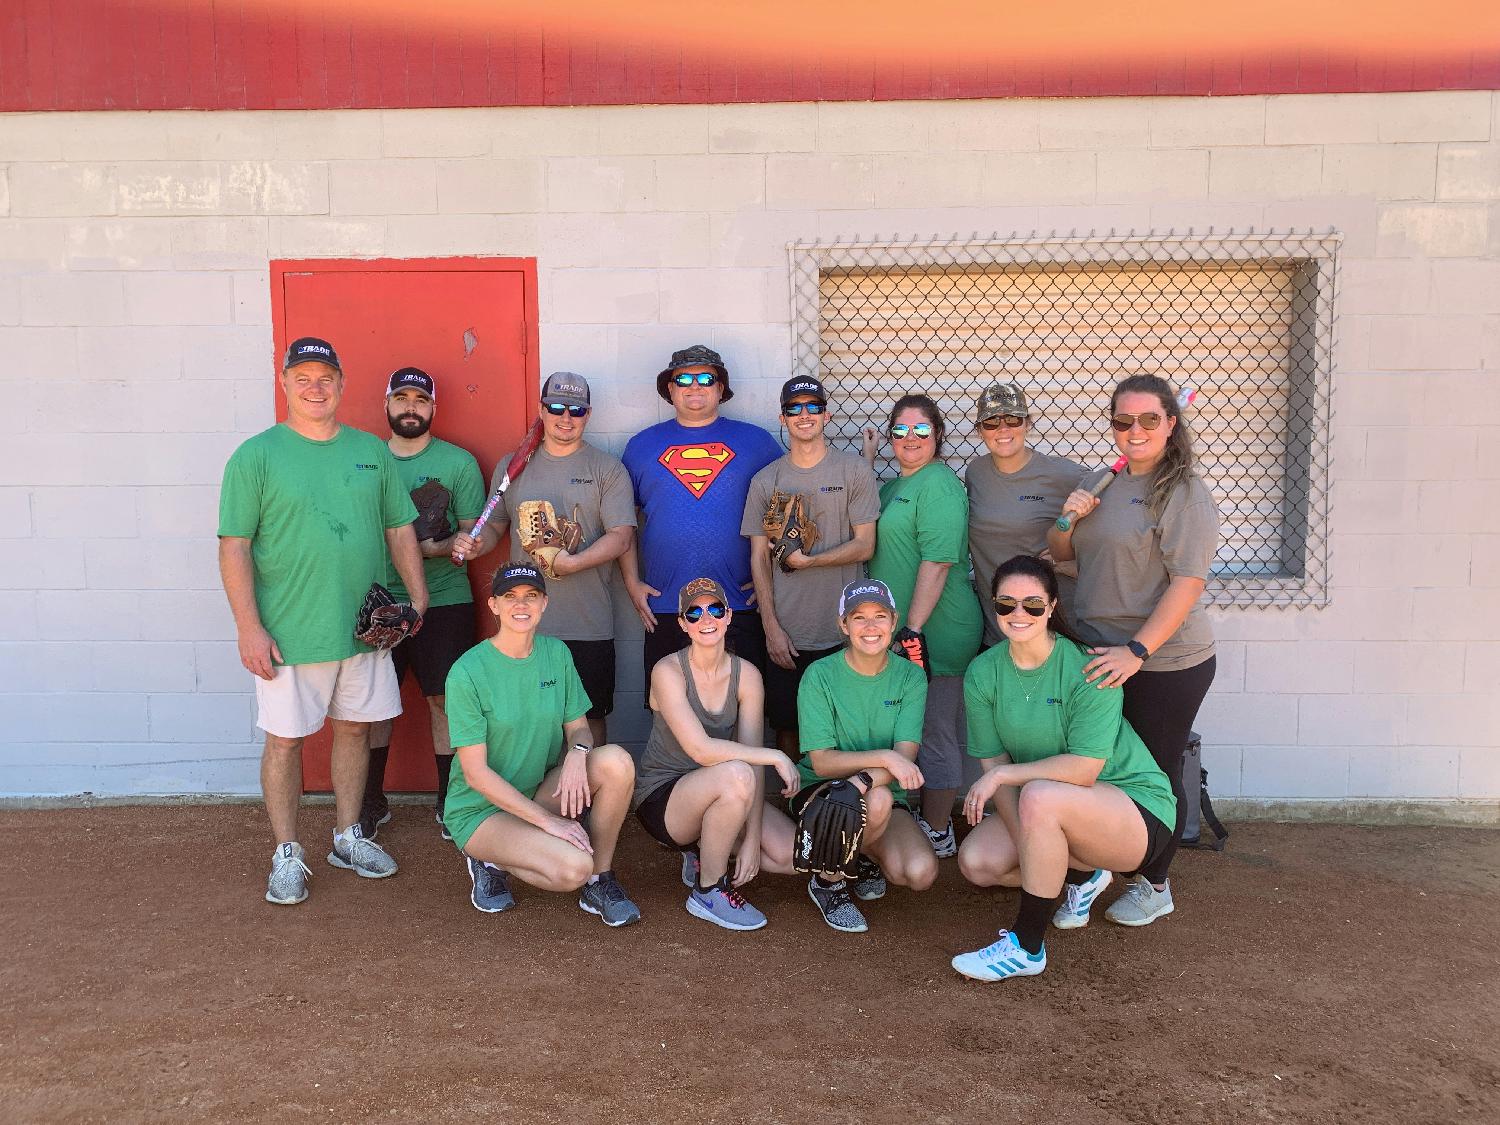 A fun afternoon of team building and coed softball is the perfect combination for this Trade group to have fun and let loose.